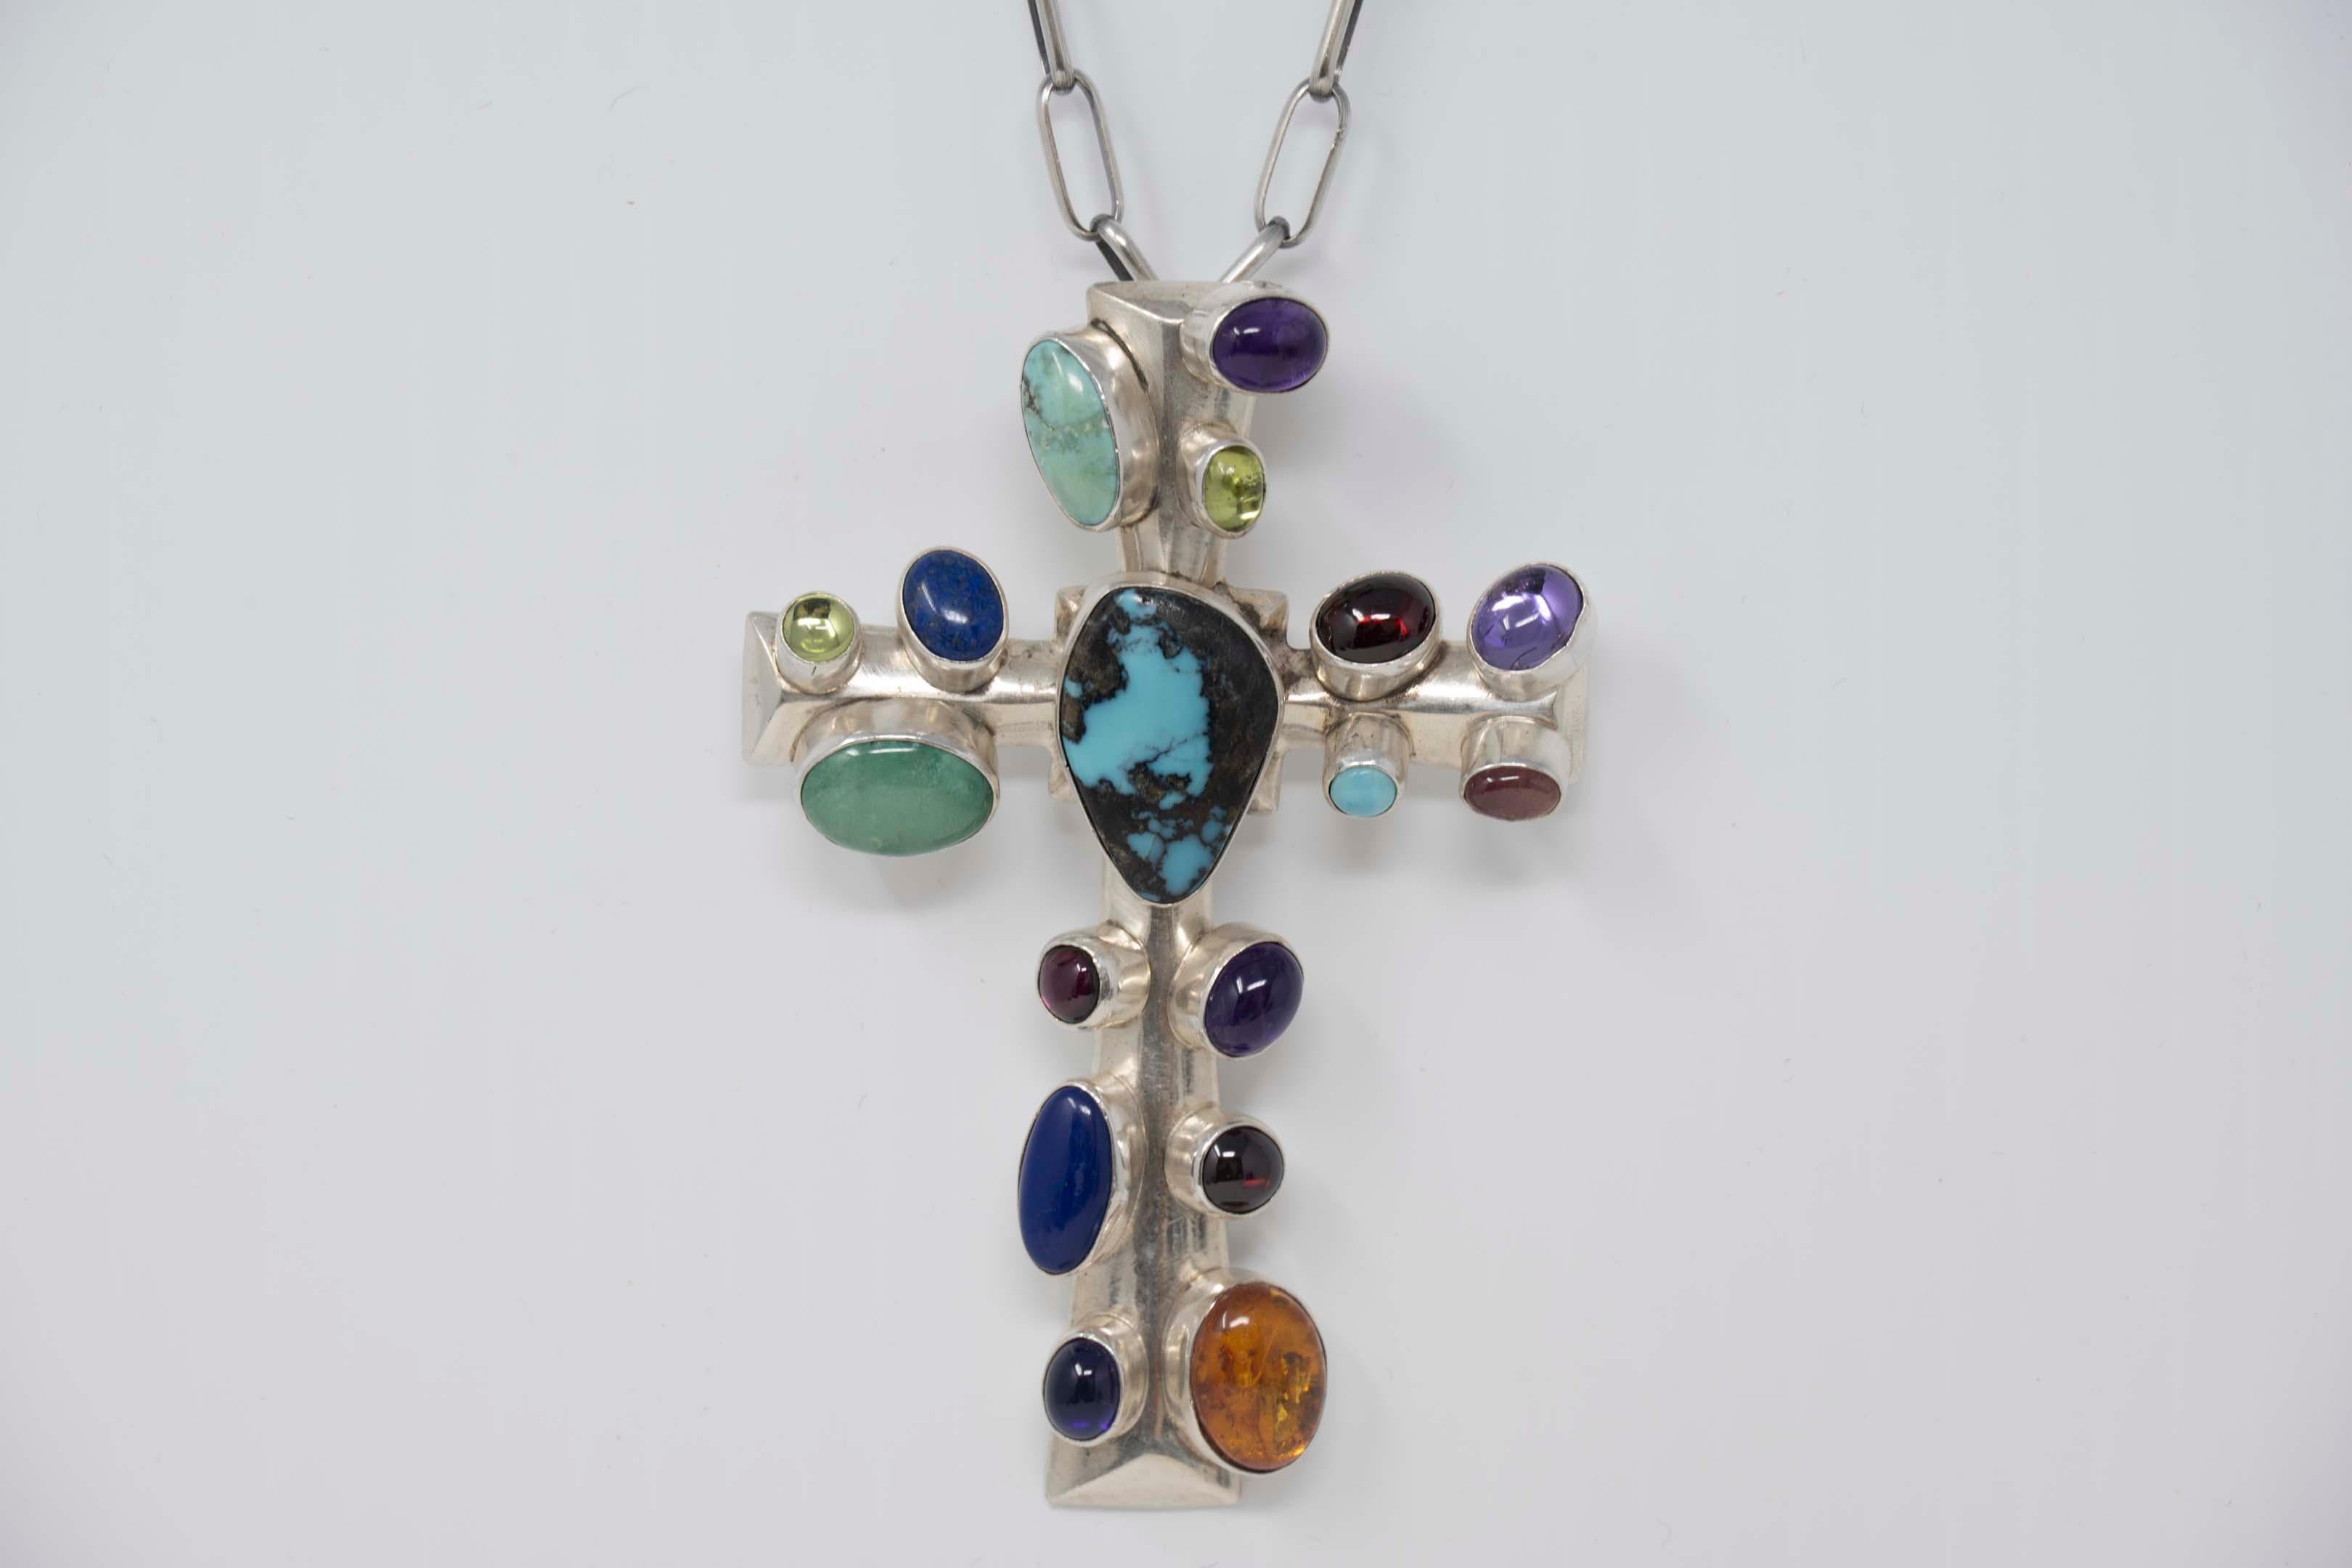 Original Nakai Navajo sterling silver and semiprecious stone with chain. Stamped on the back, sterling Nakai. Chain measures 23 inches long, the cross 3 5/8 inches x 2 1/3 inches. In excellent condition.
